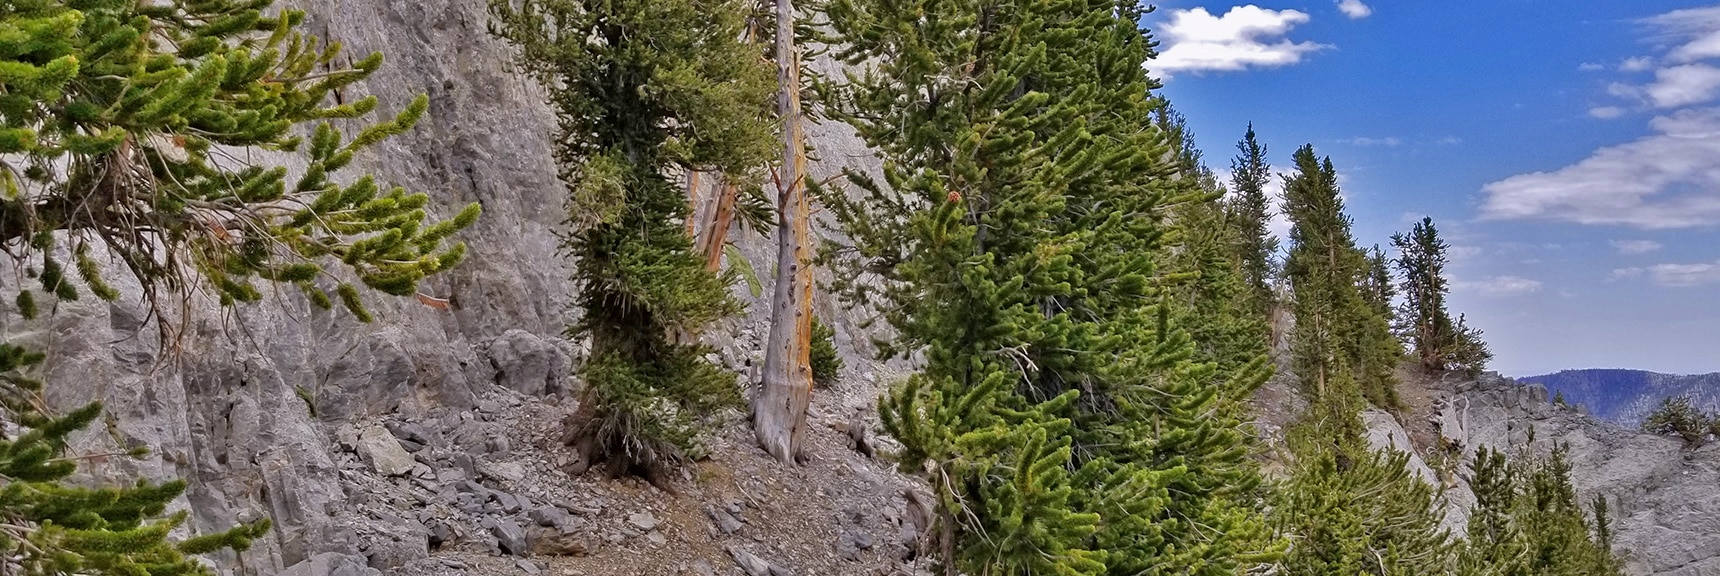 Bristlecone Pine Forest on the Ledge at the Base of Mummy's NW Cliffs. | Mummy Mountain NW Cliffs | Mt Charleston Wilderness | Spring Mountains, Nevada